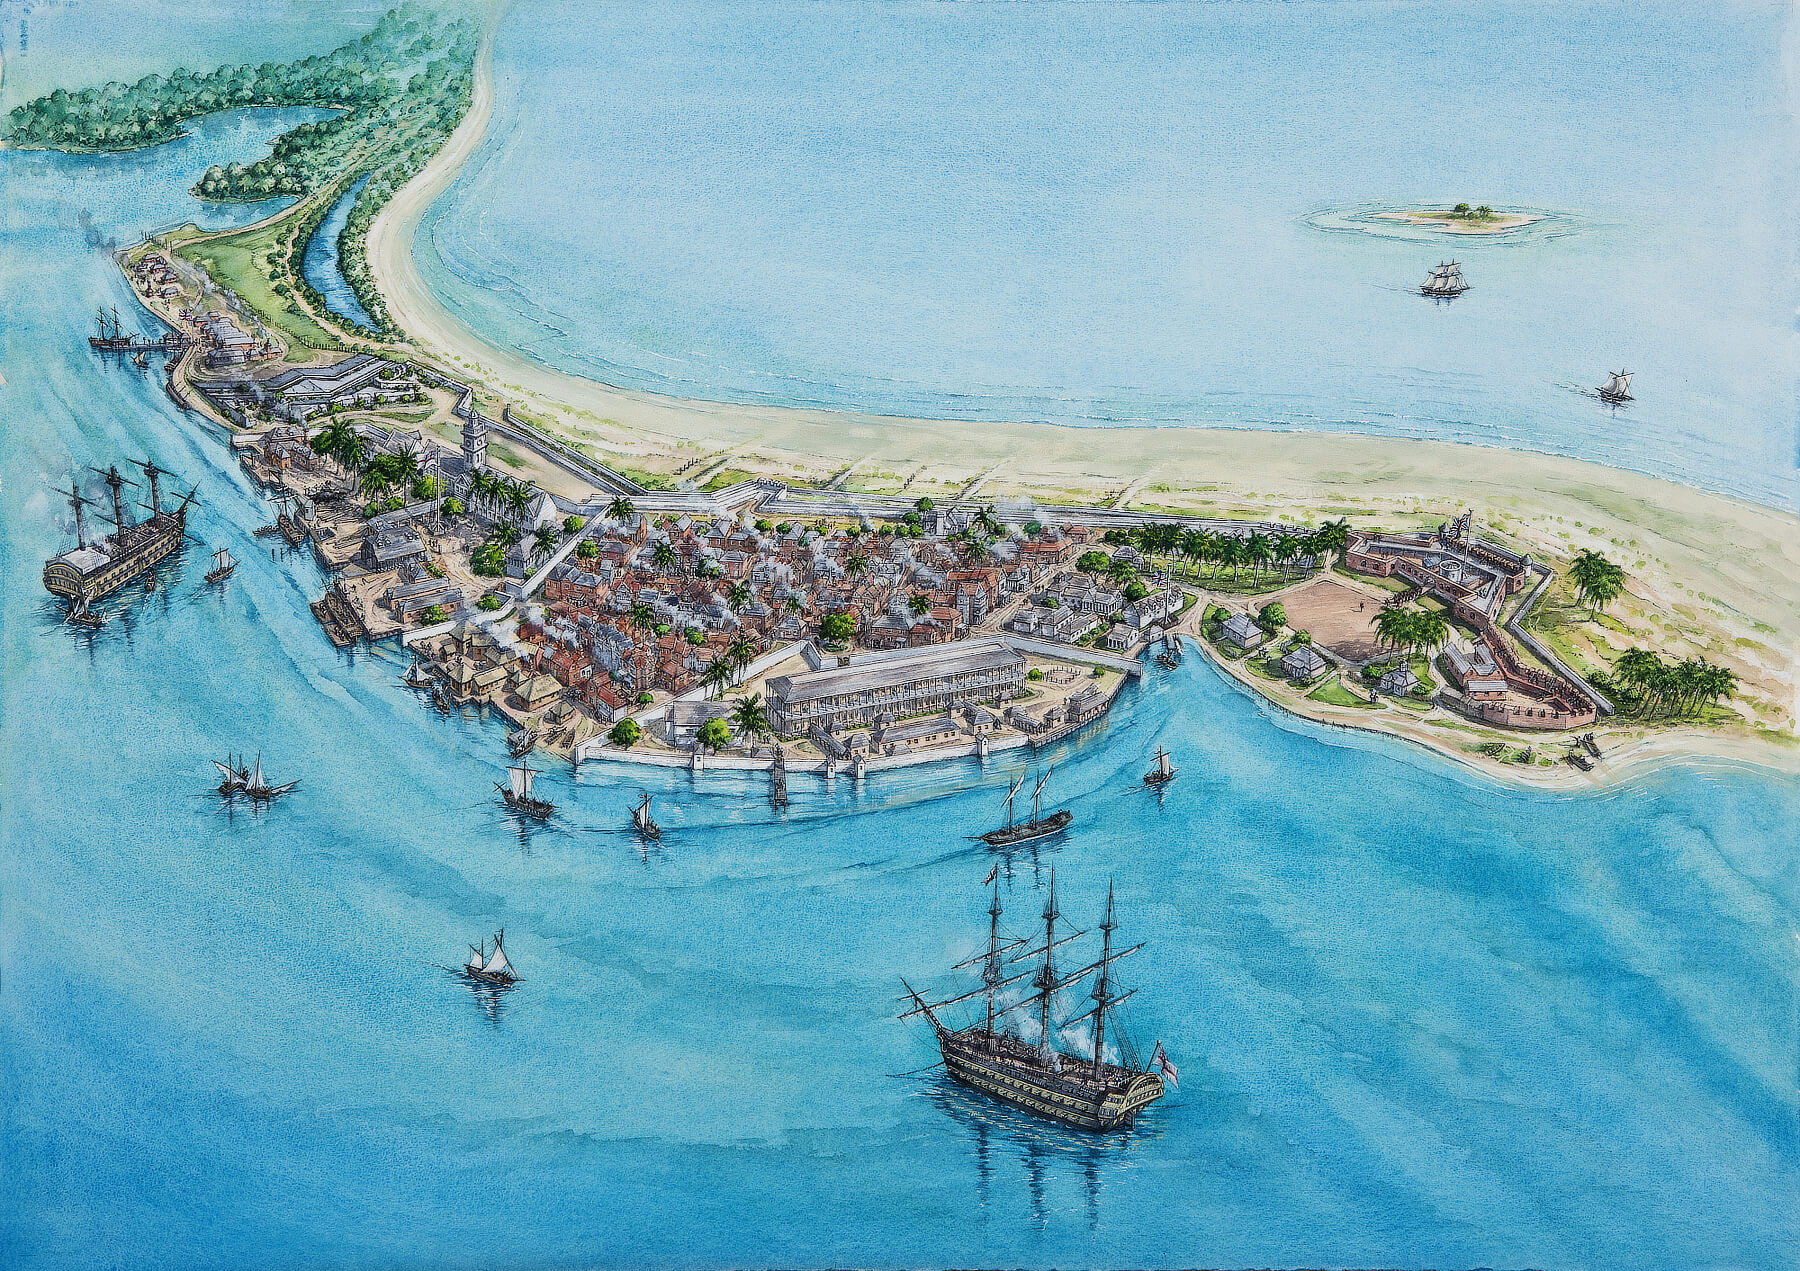 Port Royal circa 1840 after rebuilding from the Earthquake